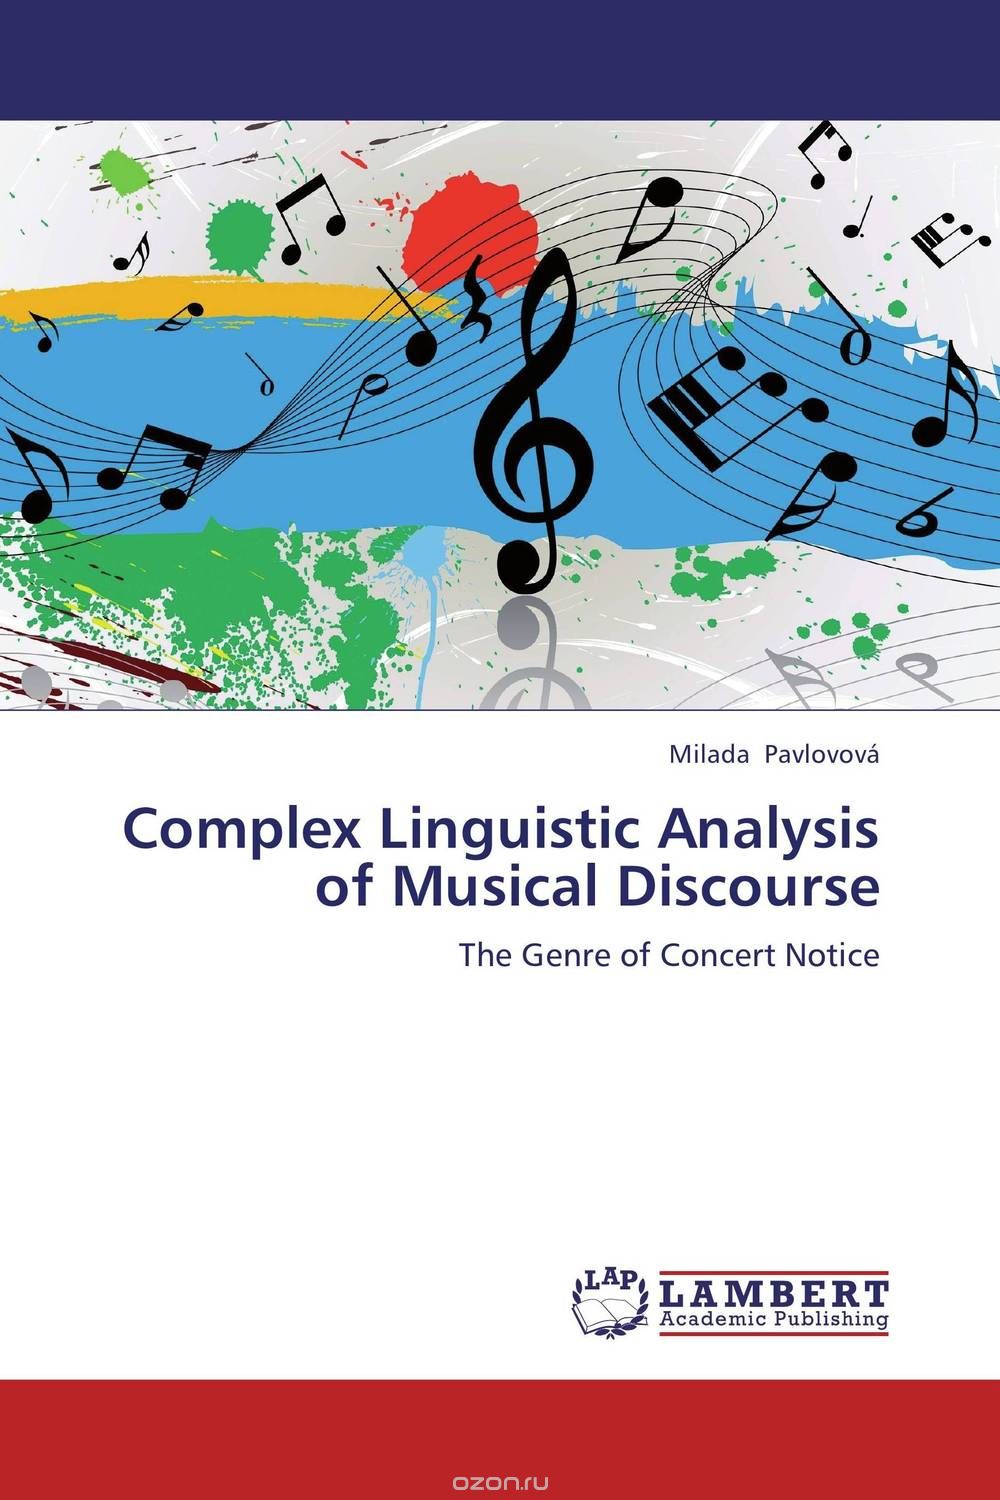 Complex Linguistic Analysis of Musical Discourse